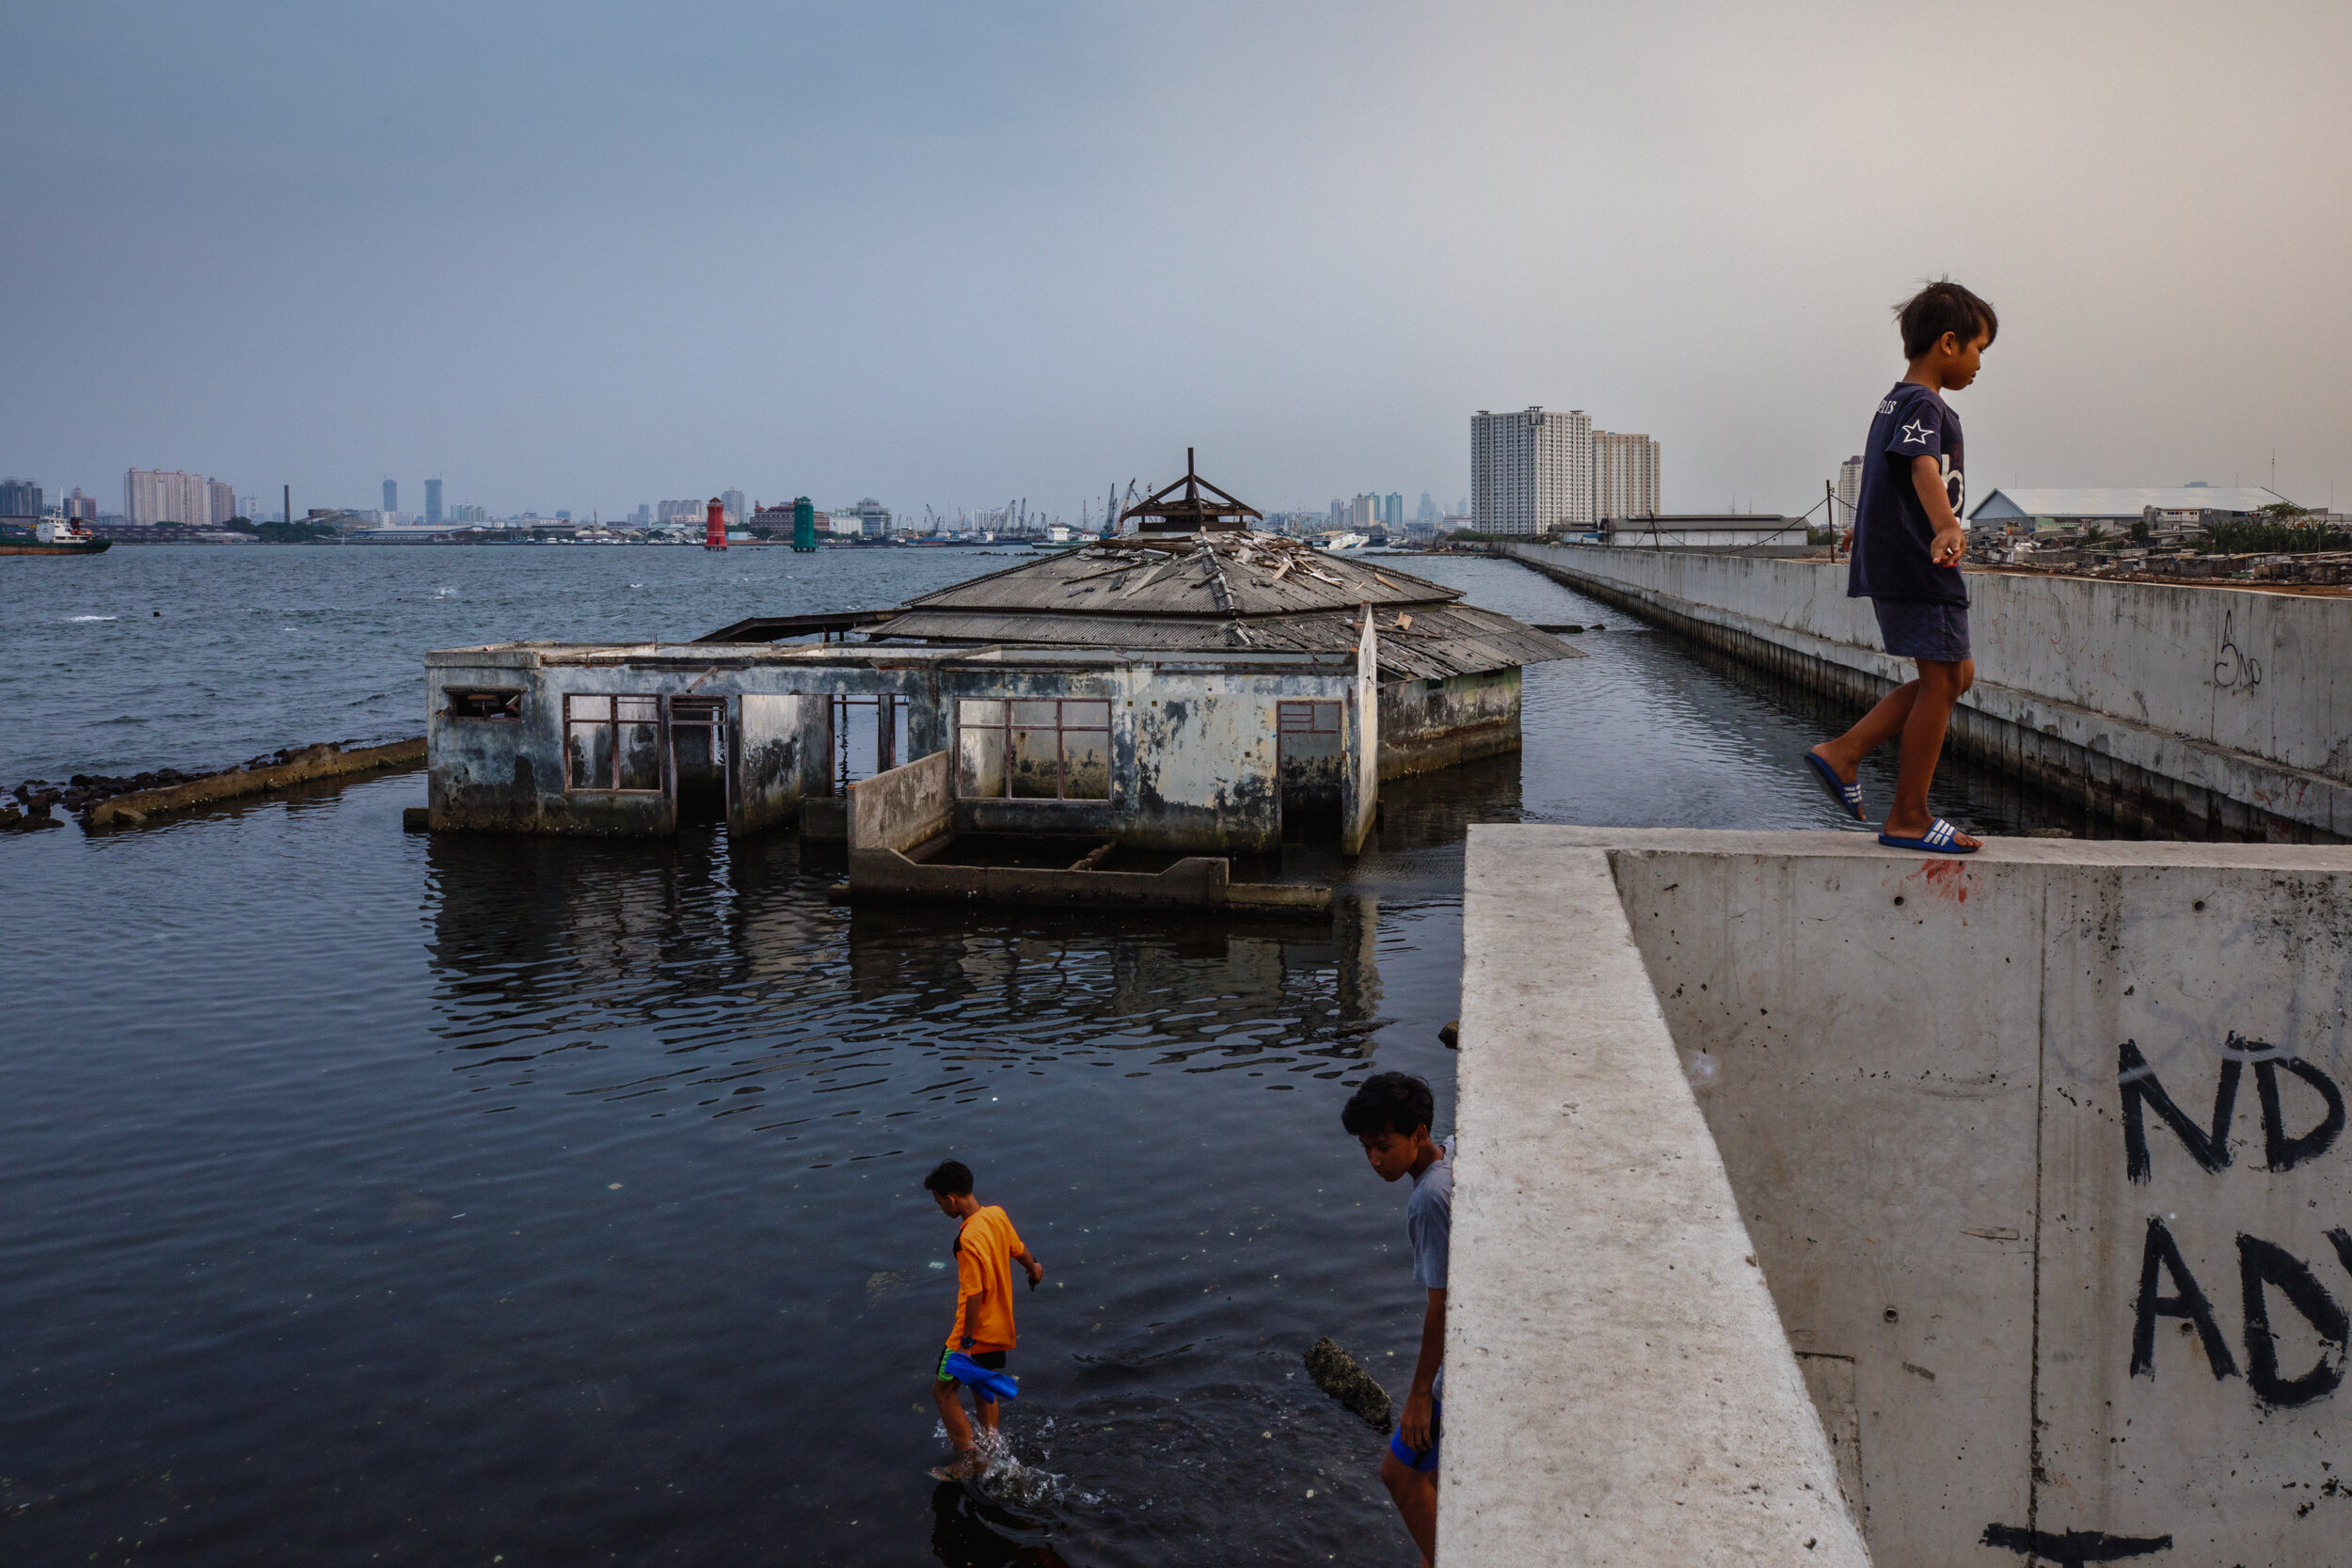  A boy walks on the newly built sea wall that is next to the  Waladuna Mosque, now partially submerged in seawater, and has become a symbol of the sinking city of Jakarta/ Indonesia - 2019 